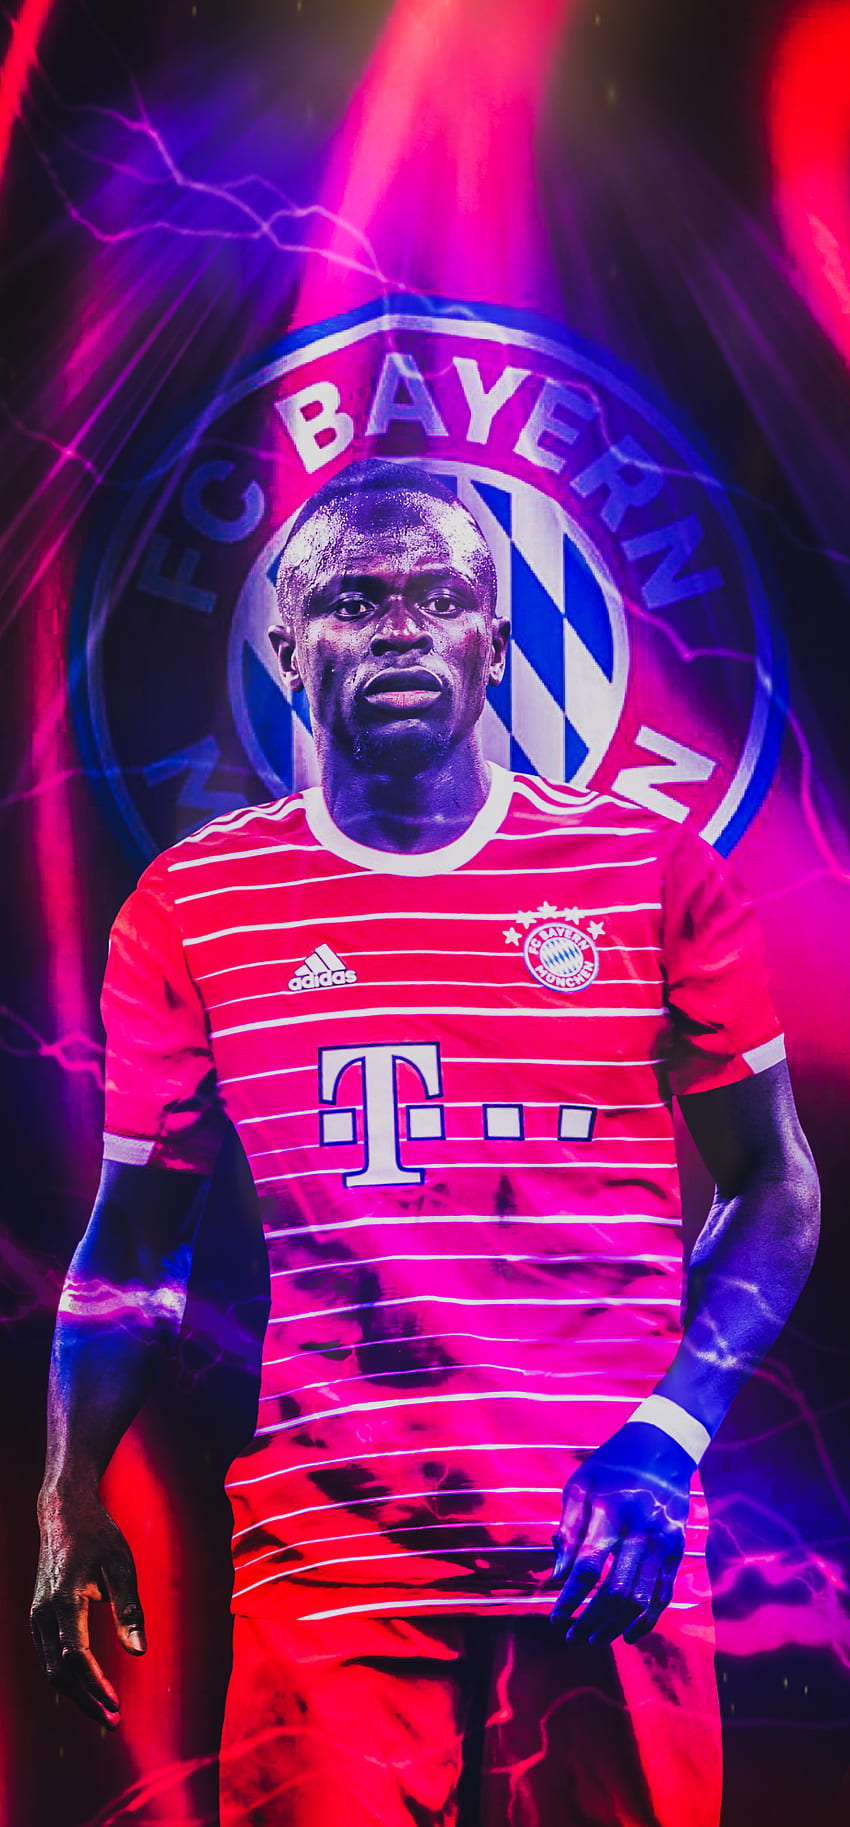 FC Bayern backgrounds for your video call